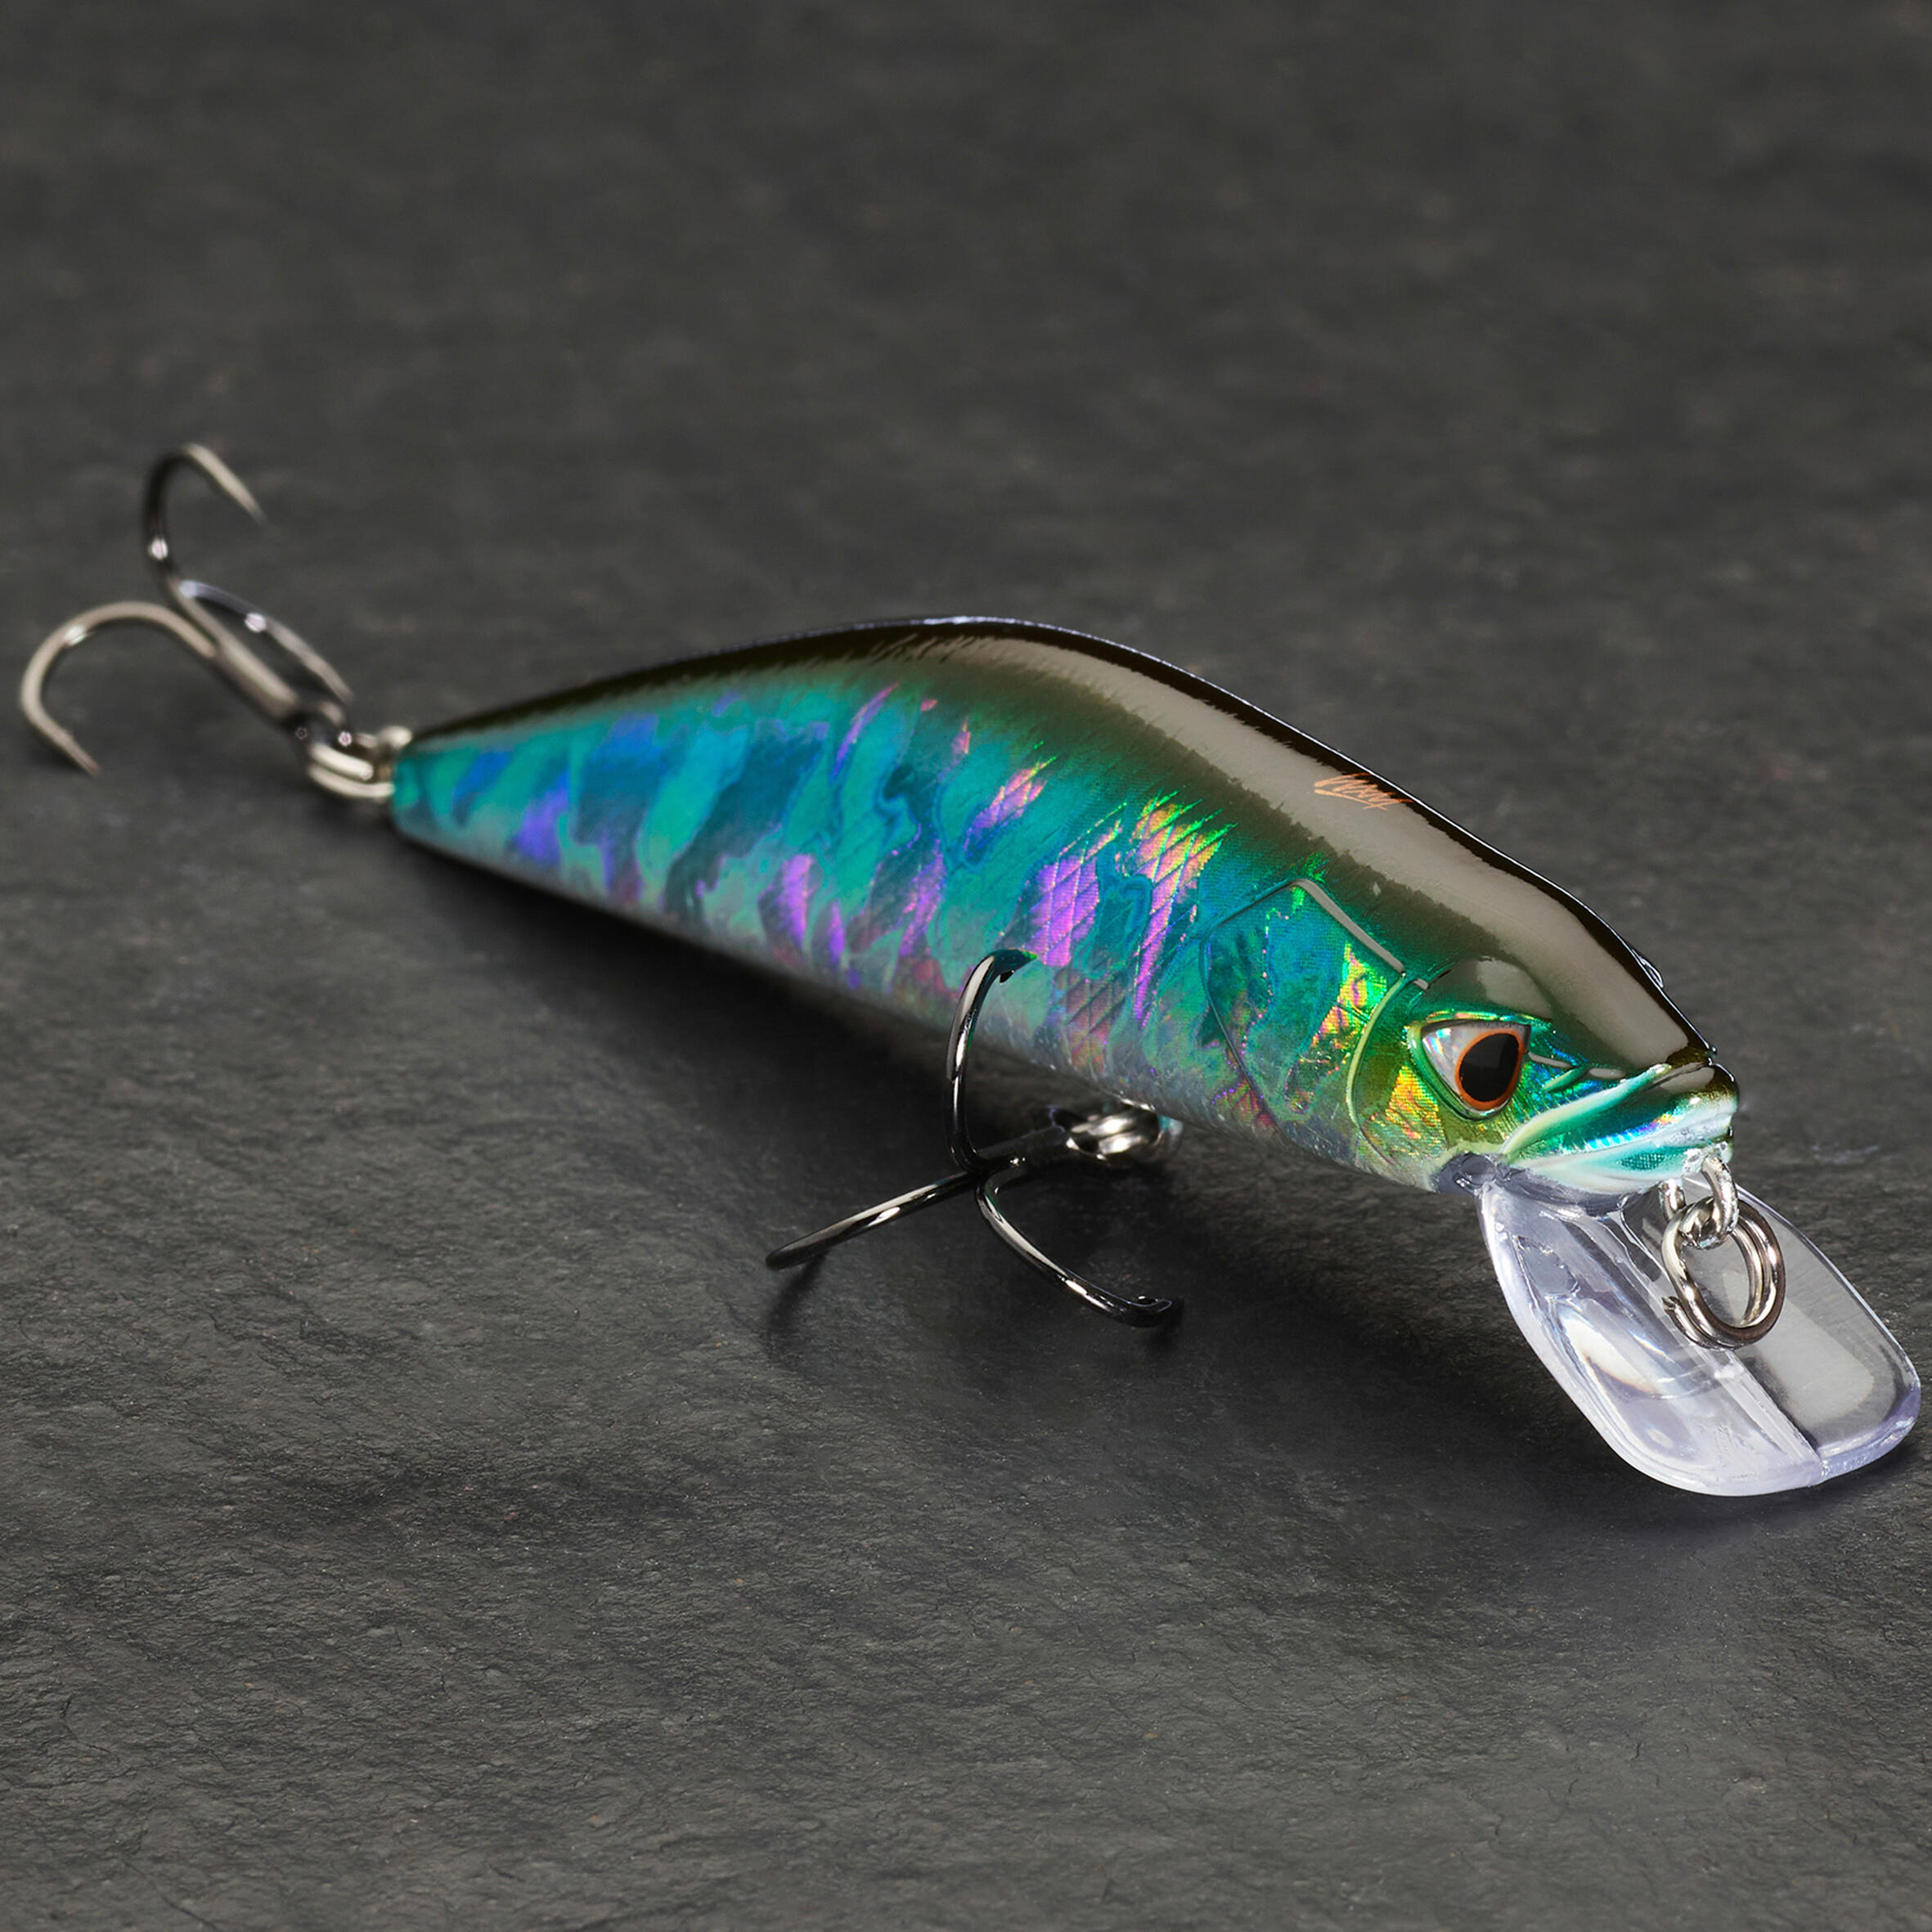 MINNOW HARD LURE FOR TROUT WXM MNWFS 85 US - BLUE BACK 2/4